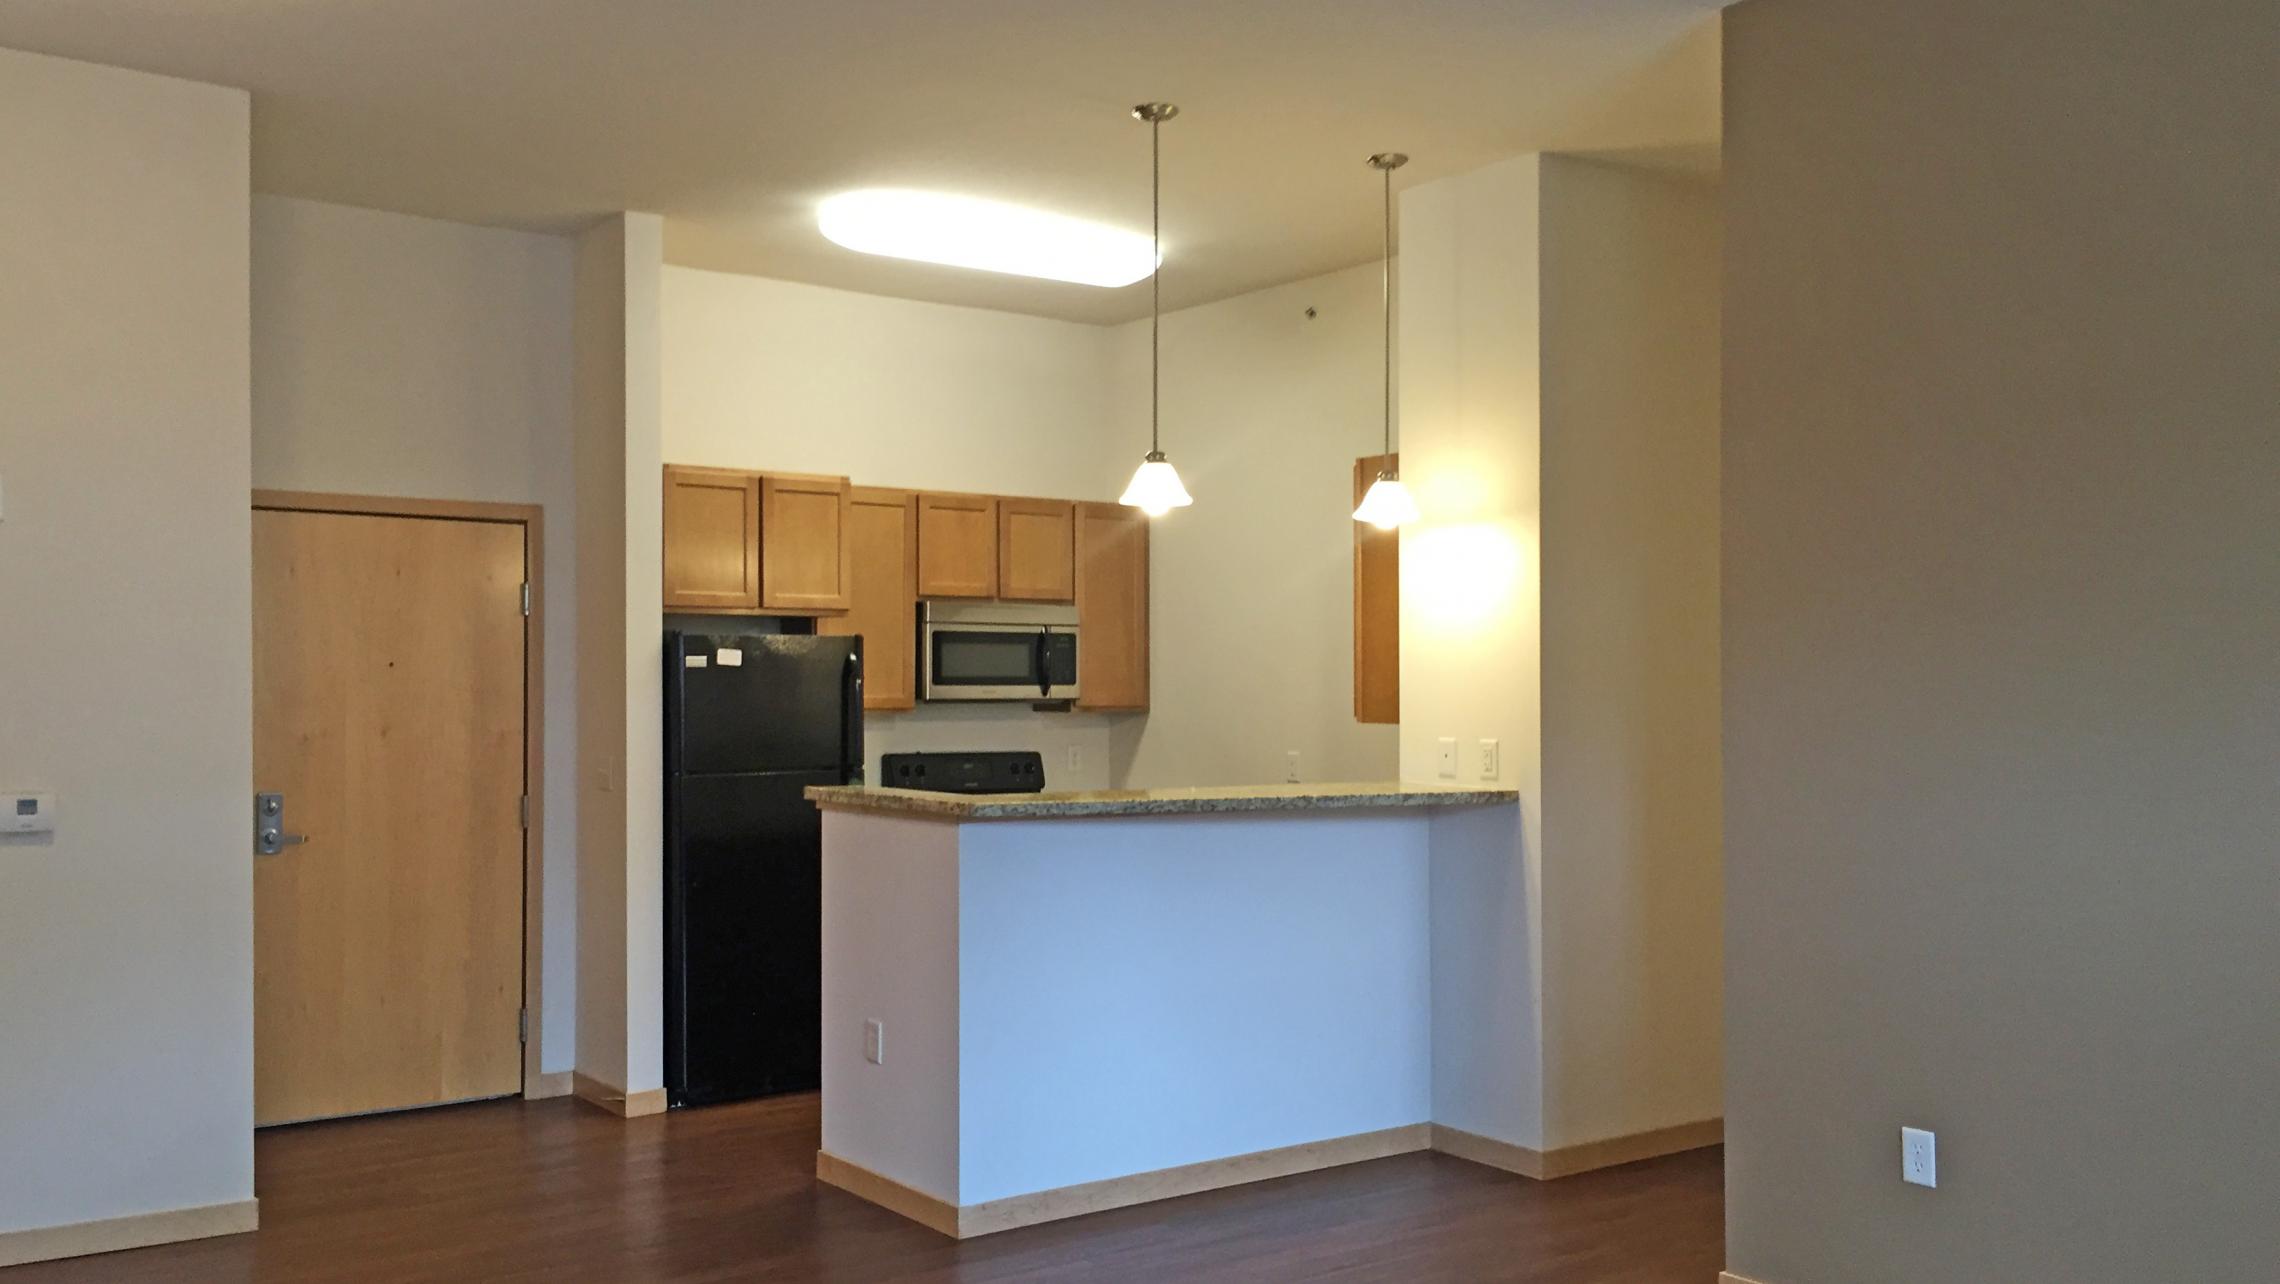 The-Depot-Apartment-2-107-Bedroom-Downtown-Madison-Capitol-View-Balcony-Lake-Cats-Fintess-Terrace-City-Living-Kithcen-Bathroom-Upscale-Patio-Modern